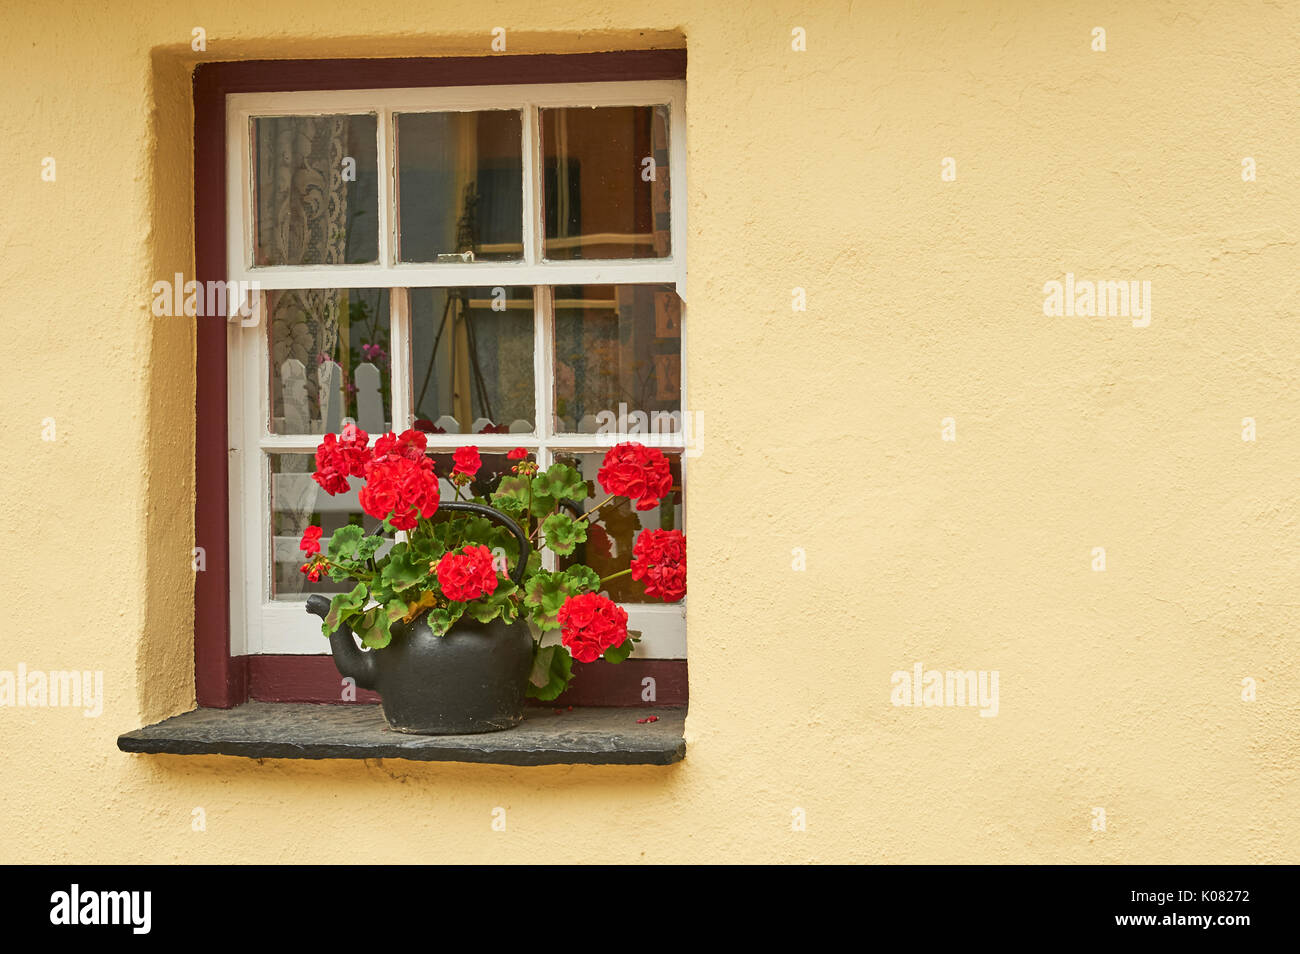 Abstract image showing a window in a wall Stock Photo